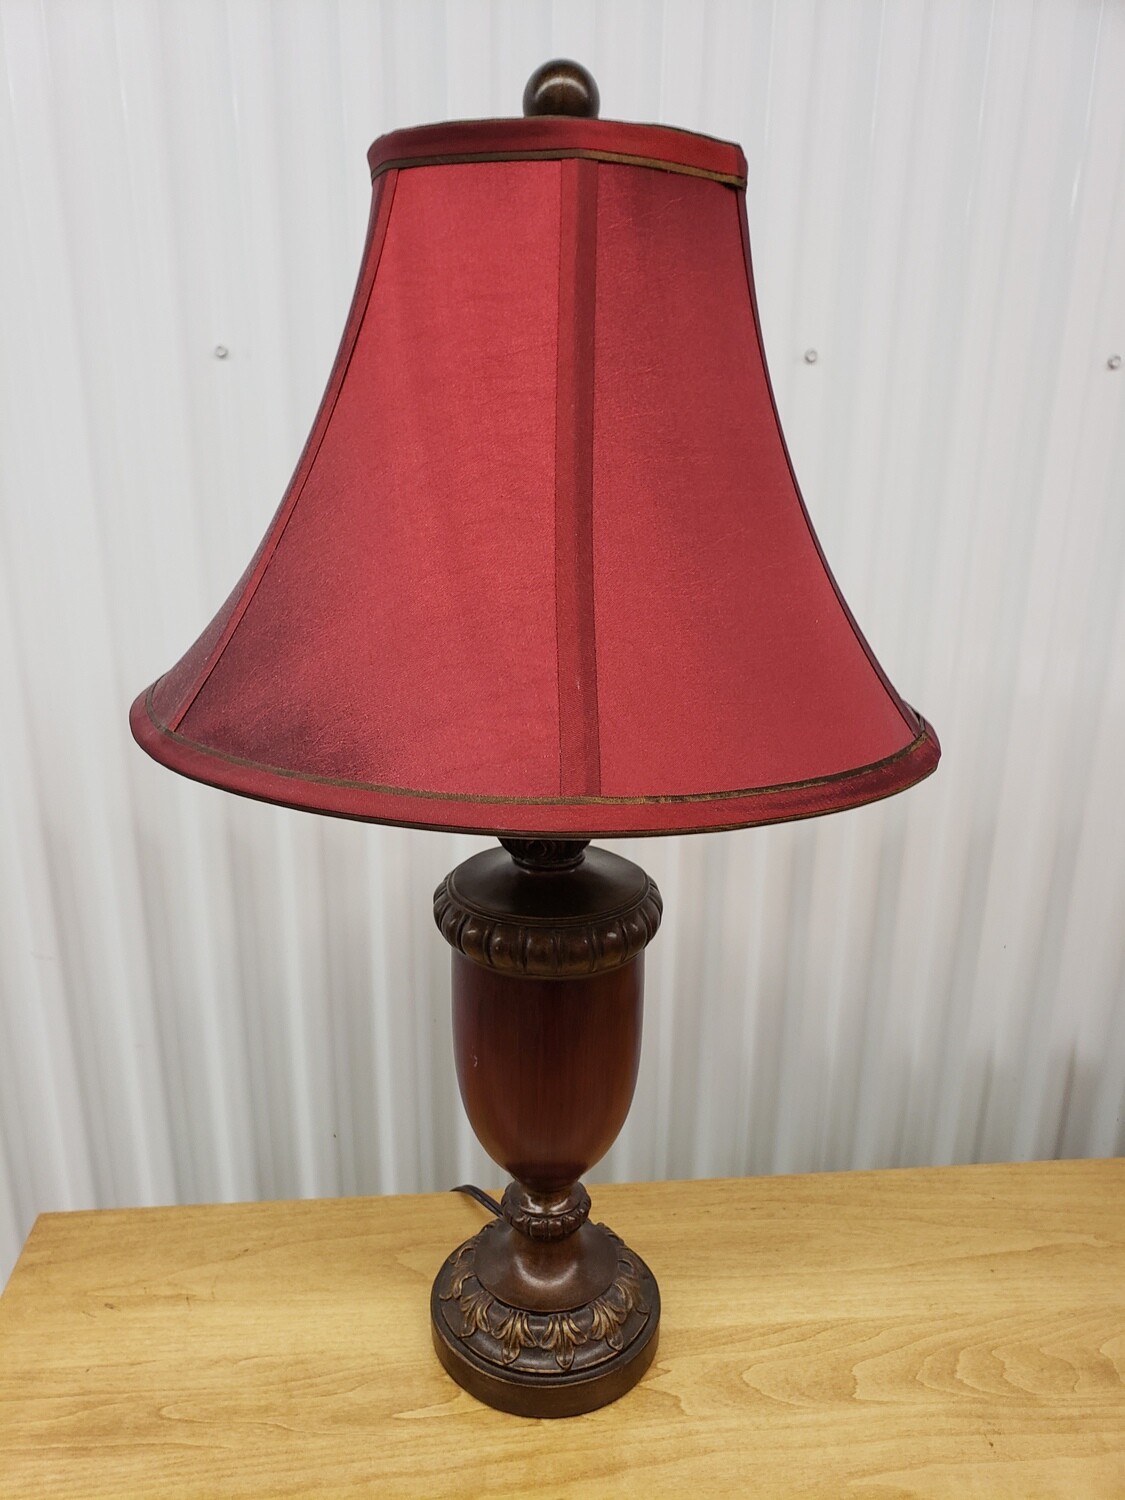 Table Lamp with Acorn Base, red shade #2314